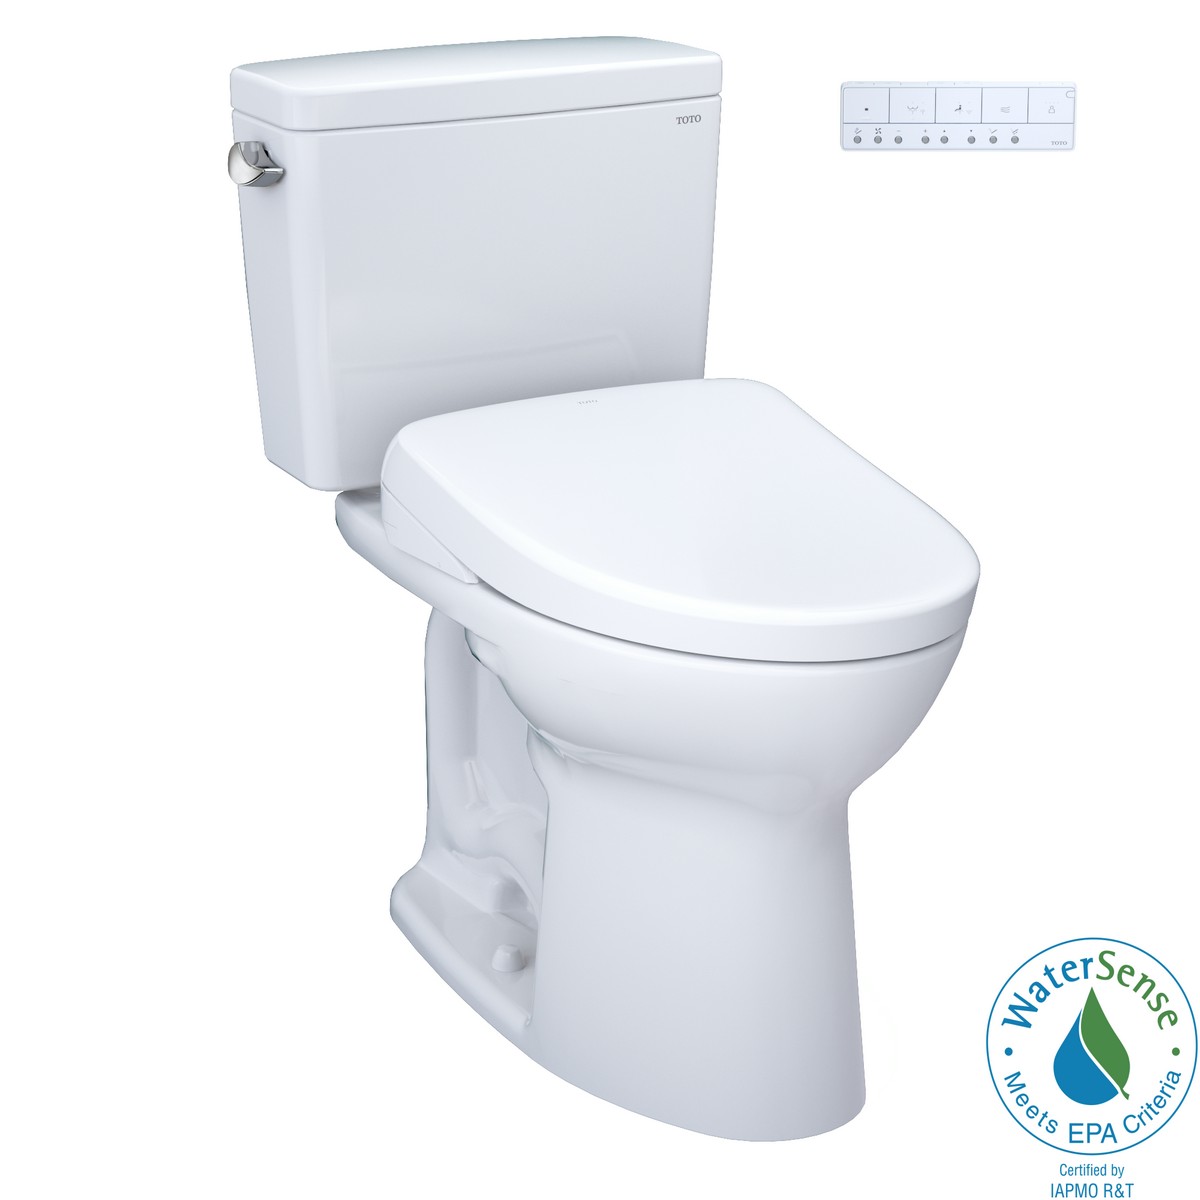 TOTO MW7764736CSF.10#01 DRAKE WASHLET+ 1.6 GPF TWO PIECE 10 INCH ROUGH-IN ELONGATED UNIVERSAL HEIGHT TORNADO FLUSH TOILET WITH WASHLET S7A BIDET SEAT IN COTTON WHITE